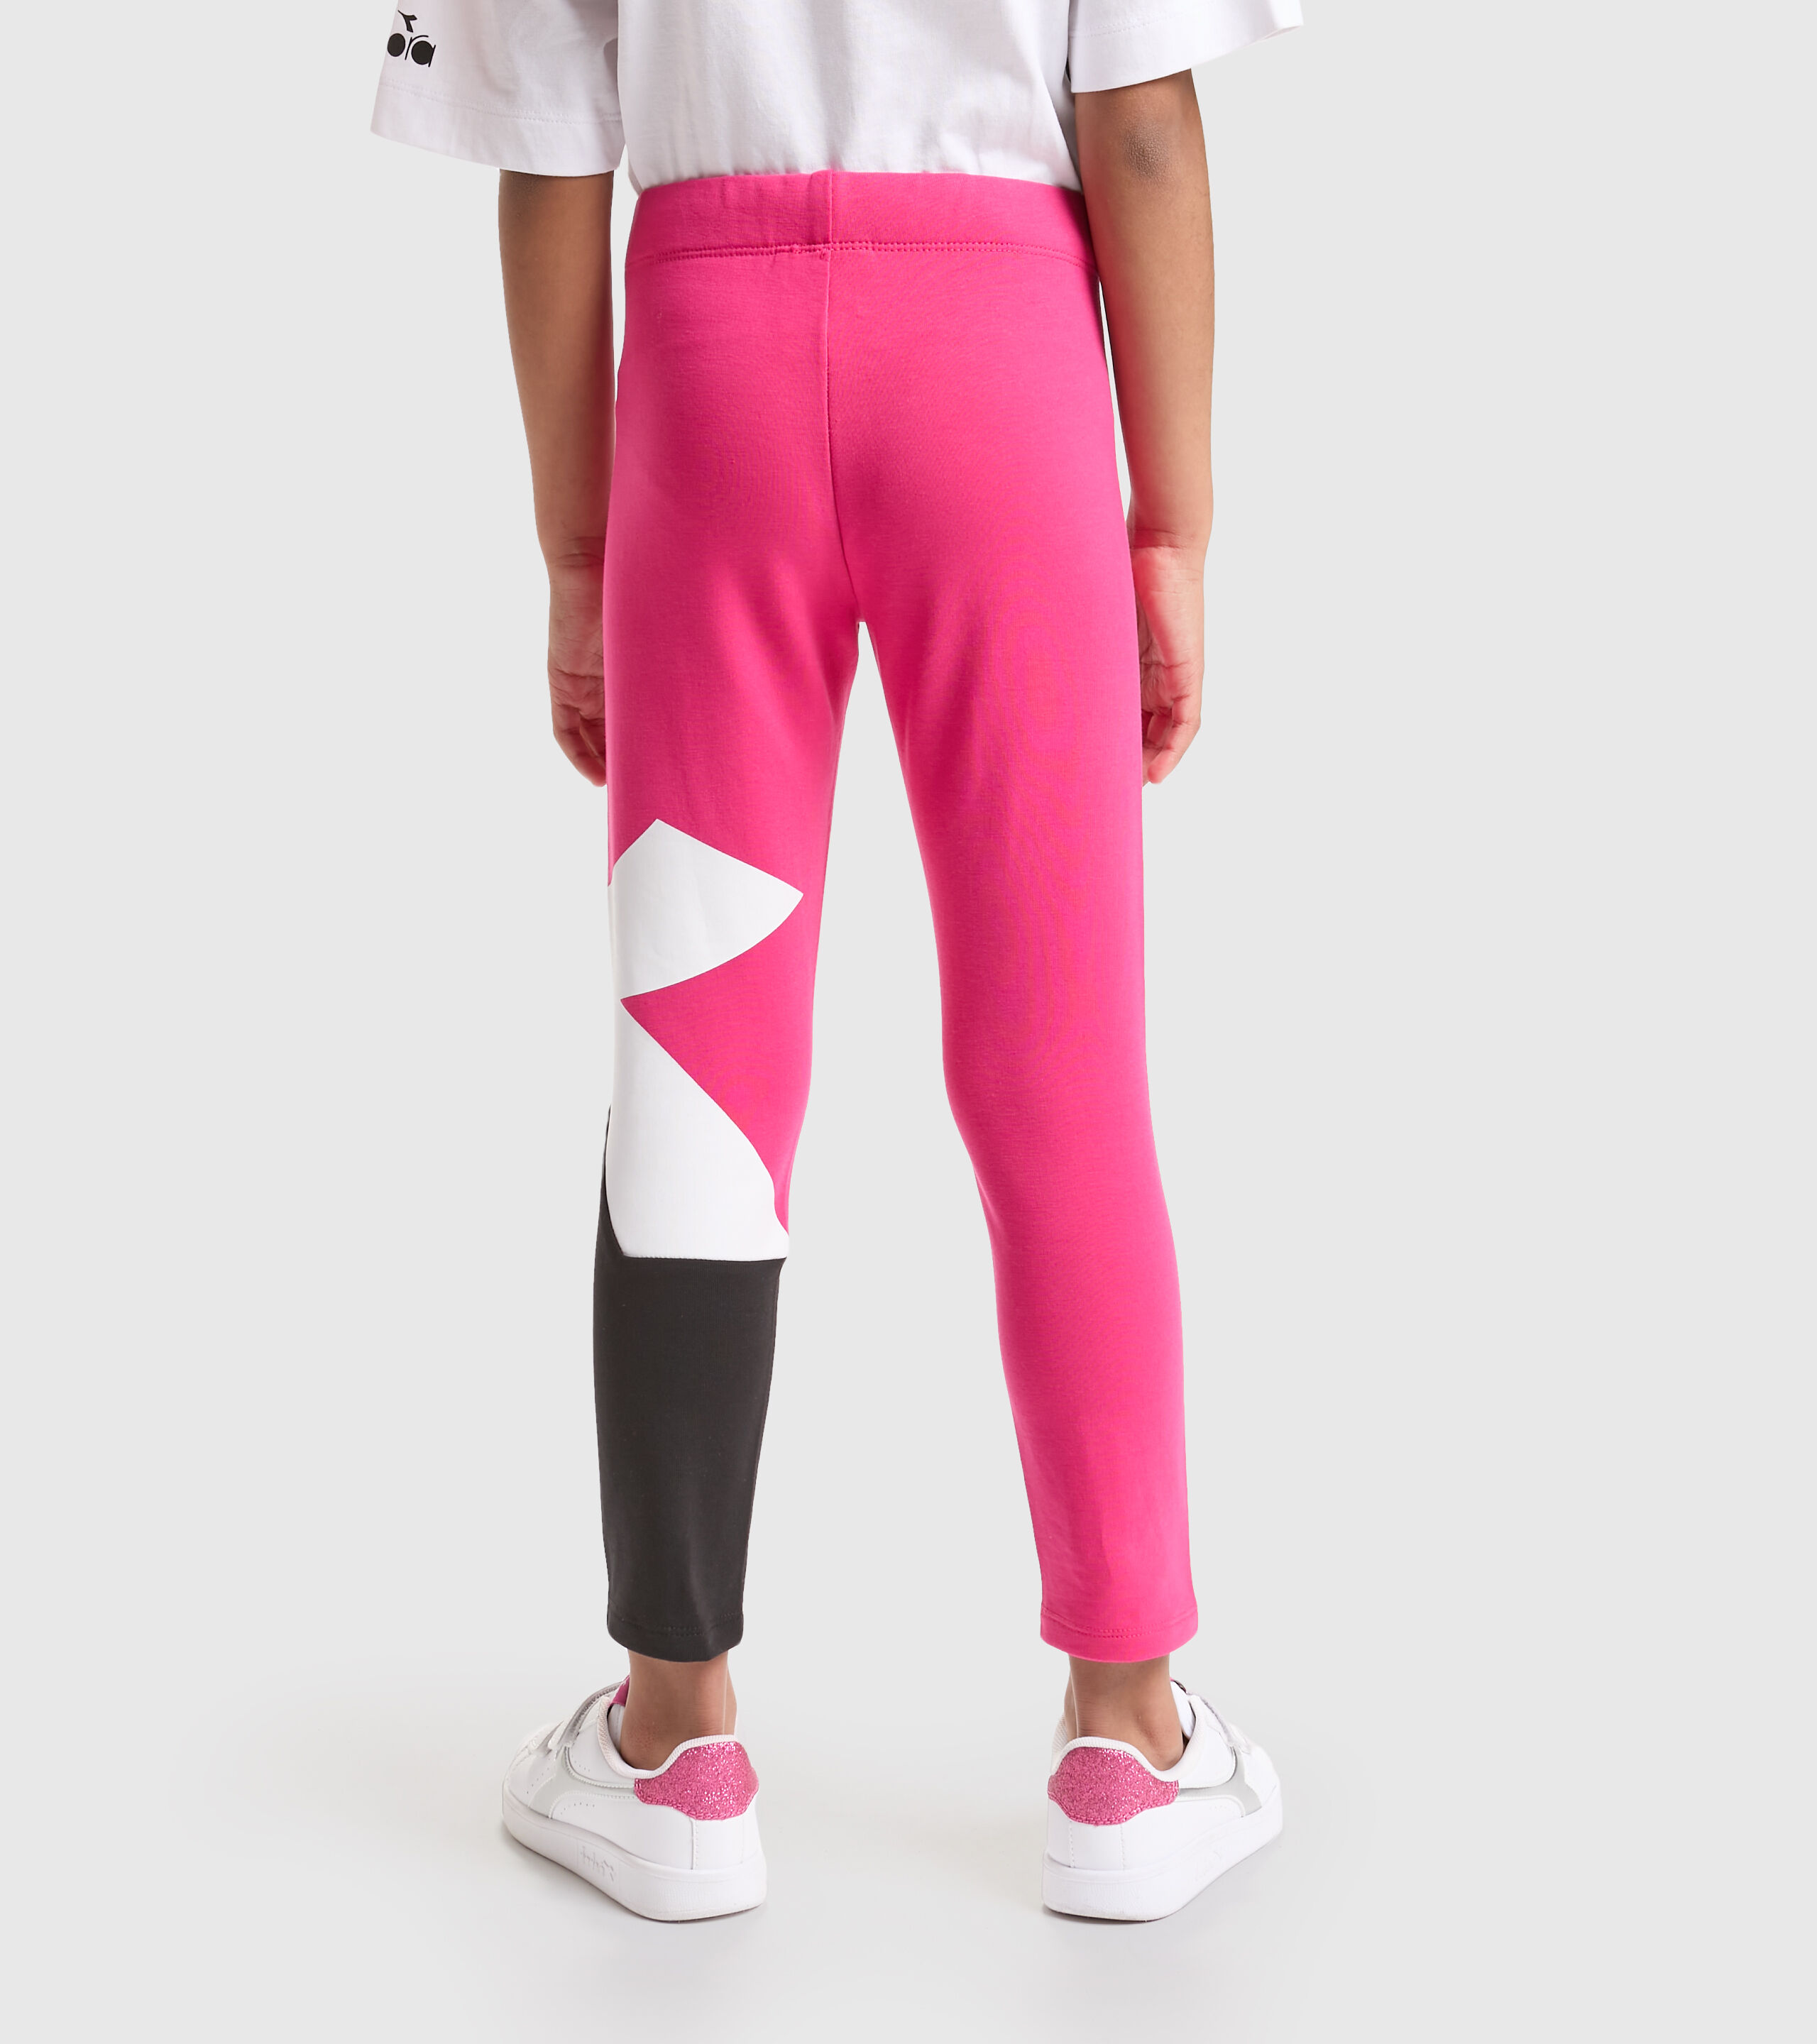 Women's Leggings, Tights & Sports Clothes | Cotton On USA